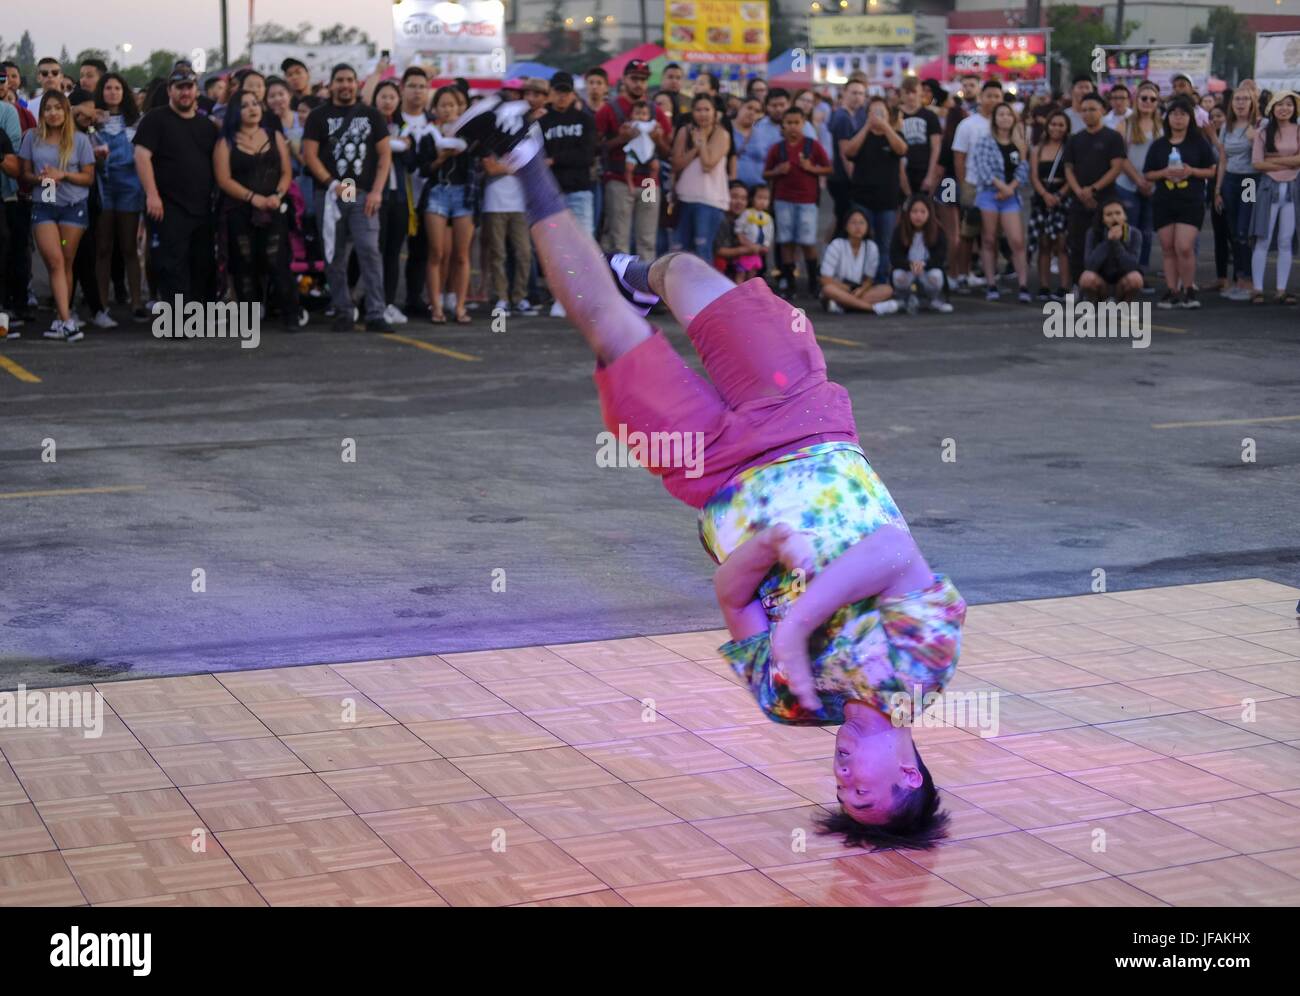 Arcadia, California, USA. 30th June, 2017. Young dancer perform at the '626 Night Market' on June 30, 2017 in Arcadia, California, an event that attracts all generations of the Chinese American community and showcases many San Gabriel Valley food vendors. Credit: Ringo Chiu/ZUMA Wire/Alamy Live News Stock Photo